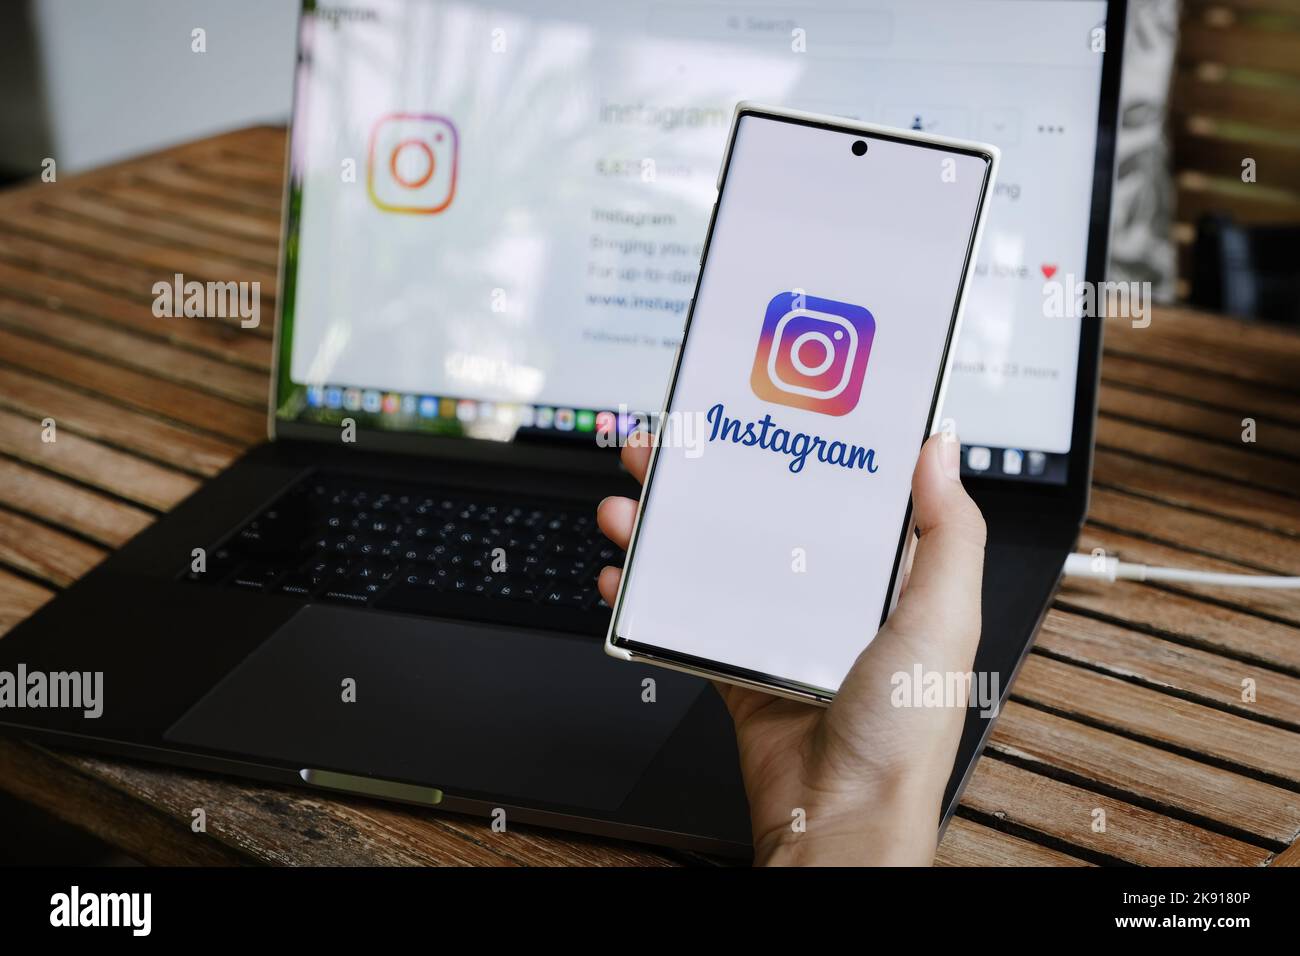 CHIANGMAI, THAILAND - July 09, 2021: A woman holding smartphone with Instagram application on the screen. Instagram is a photo sharing app for Stock Photo